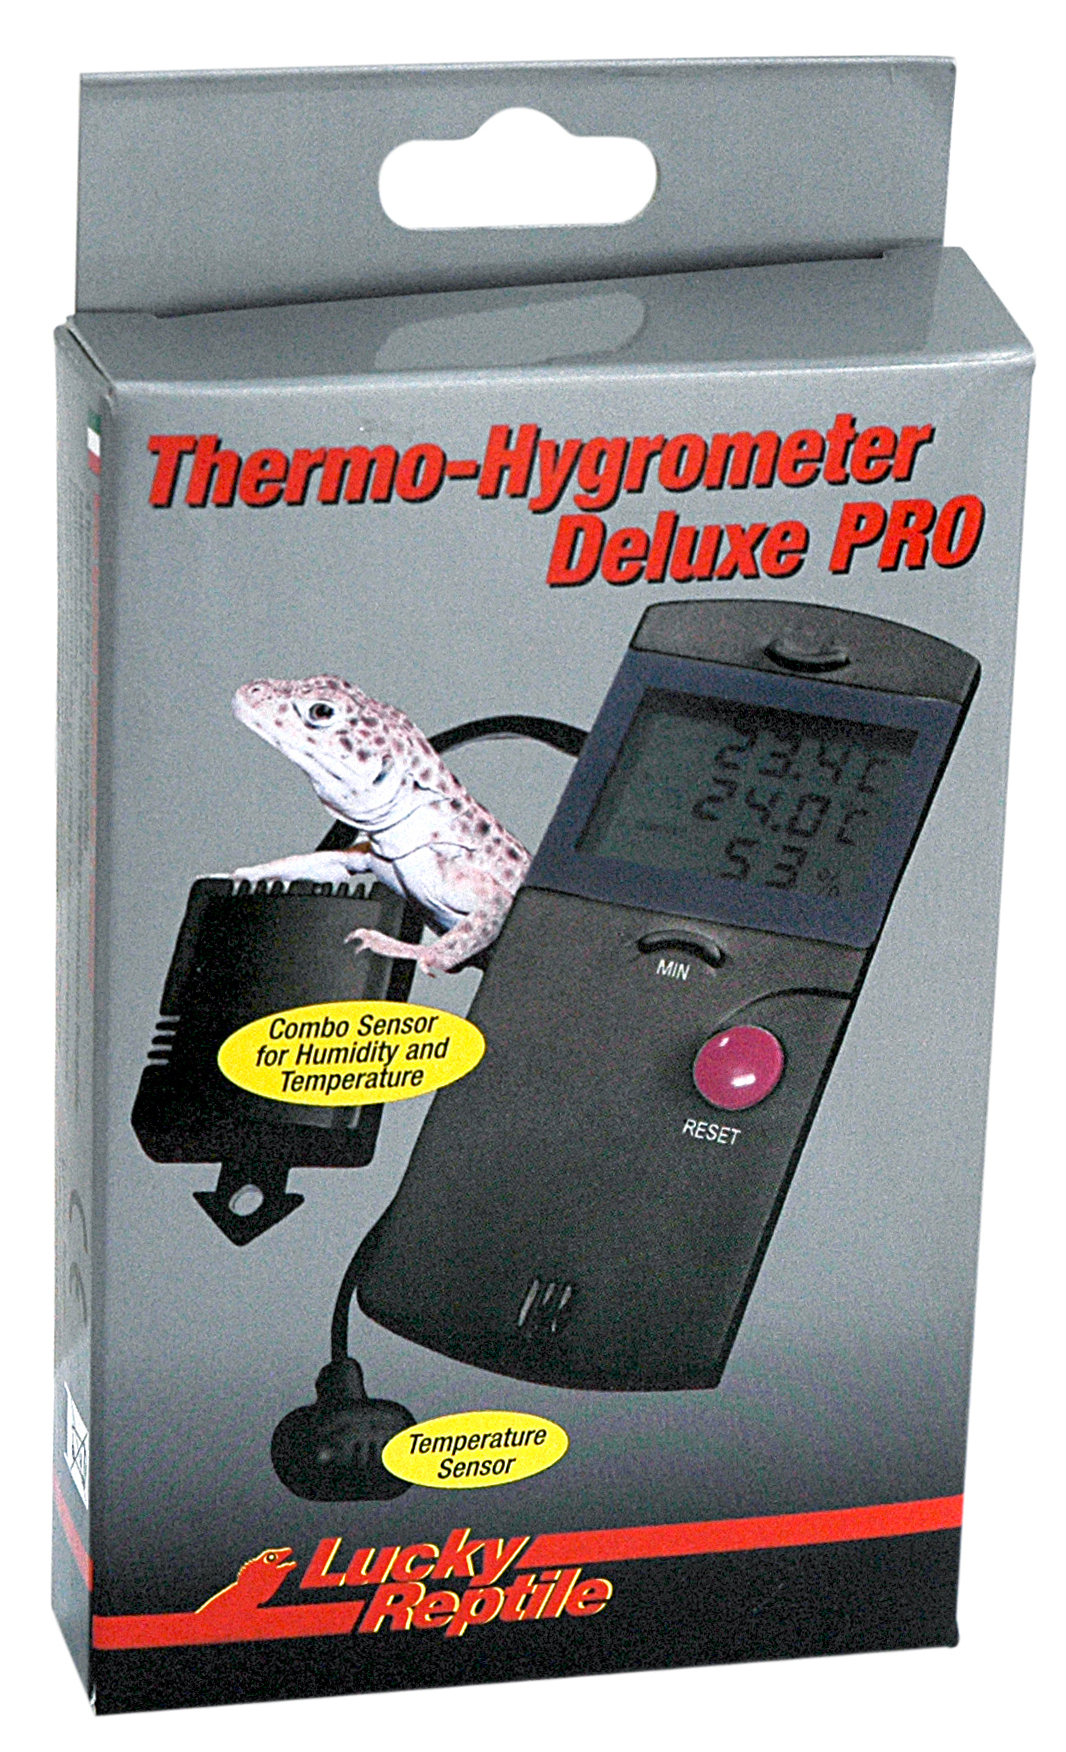 Thermometer-Hygrometer Deluxe PRO